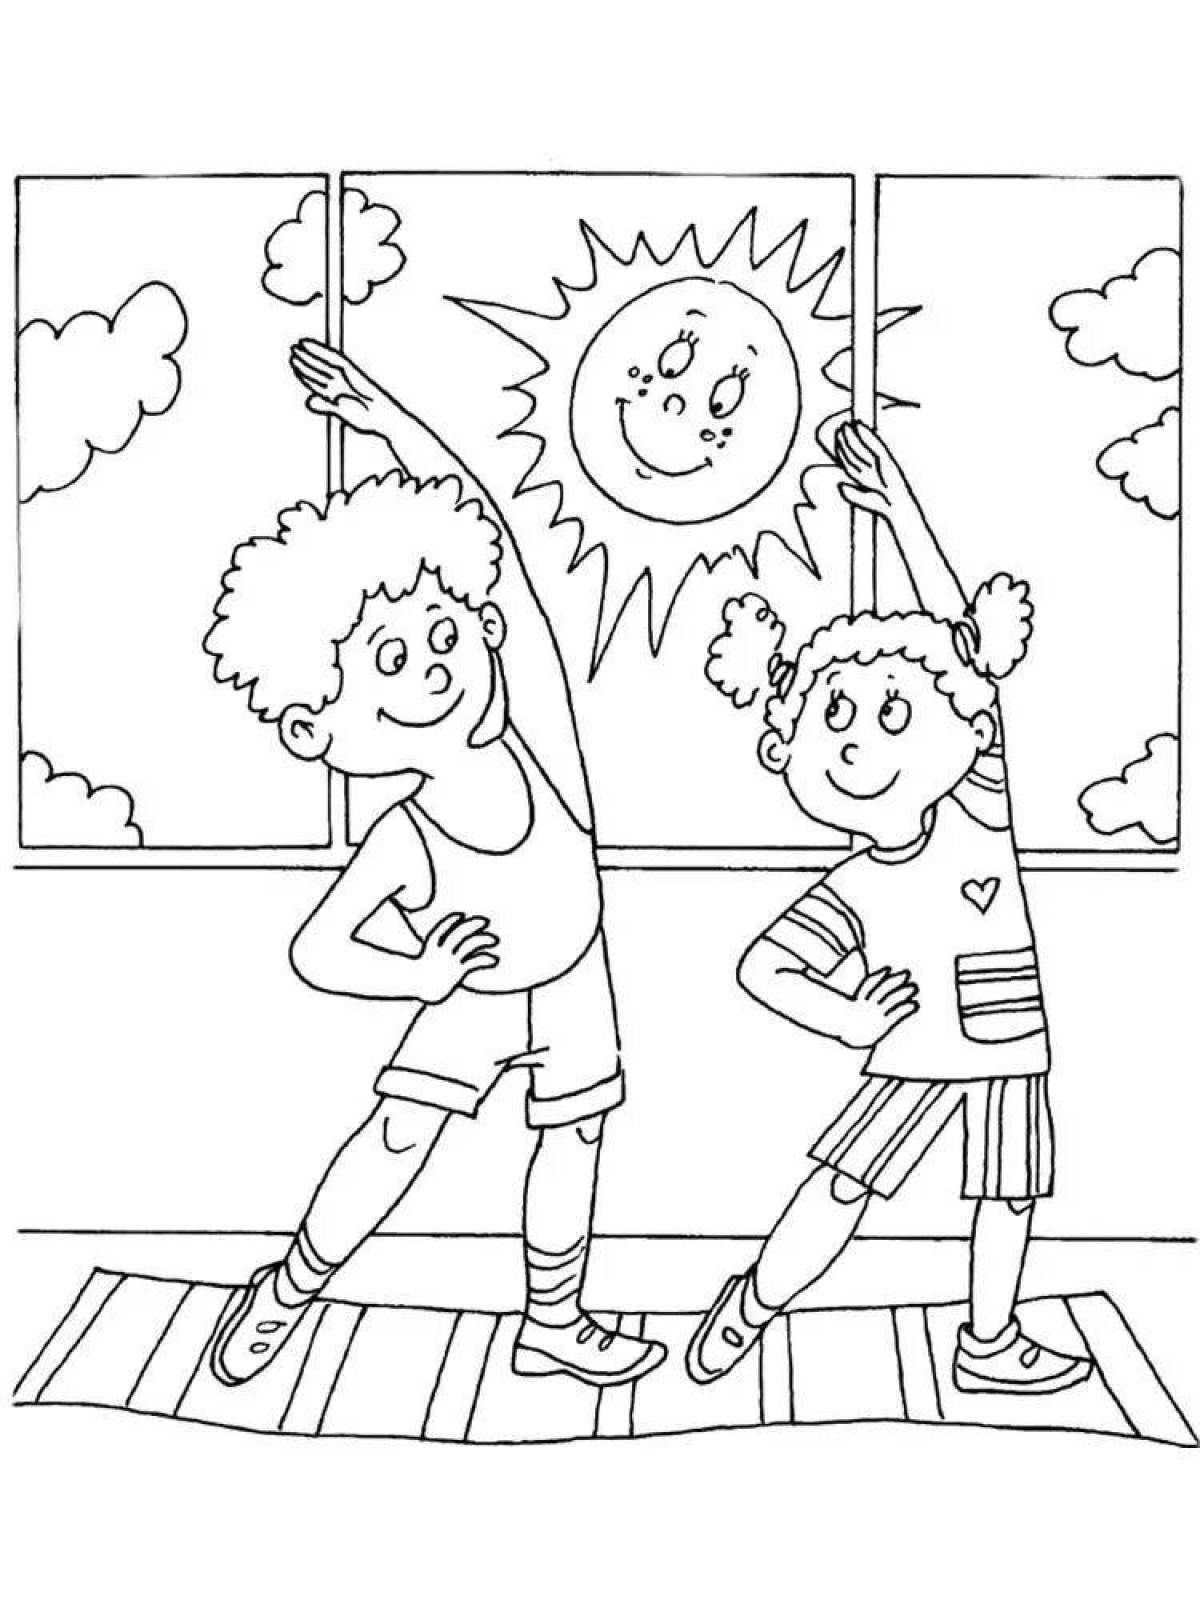 Charming lifestyle coloring page